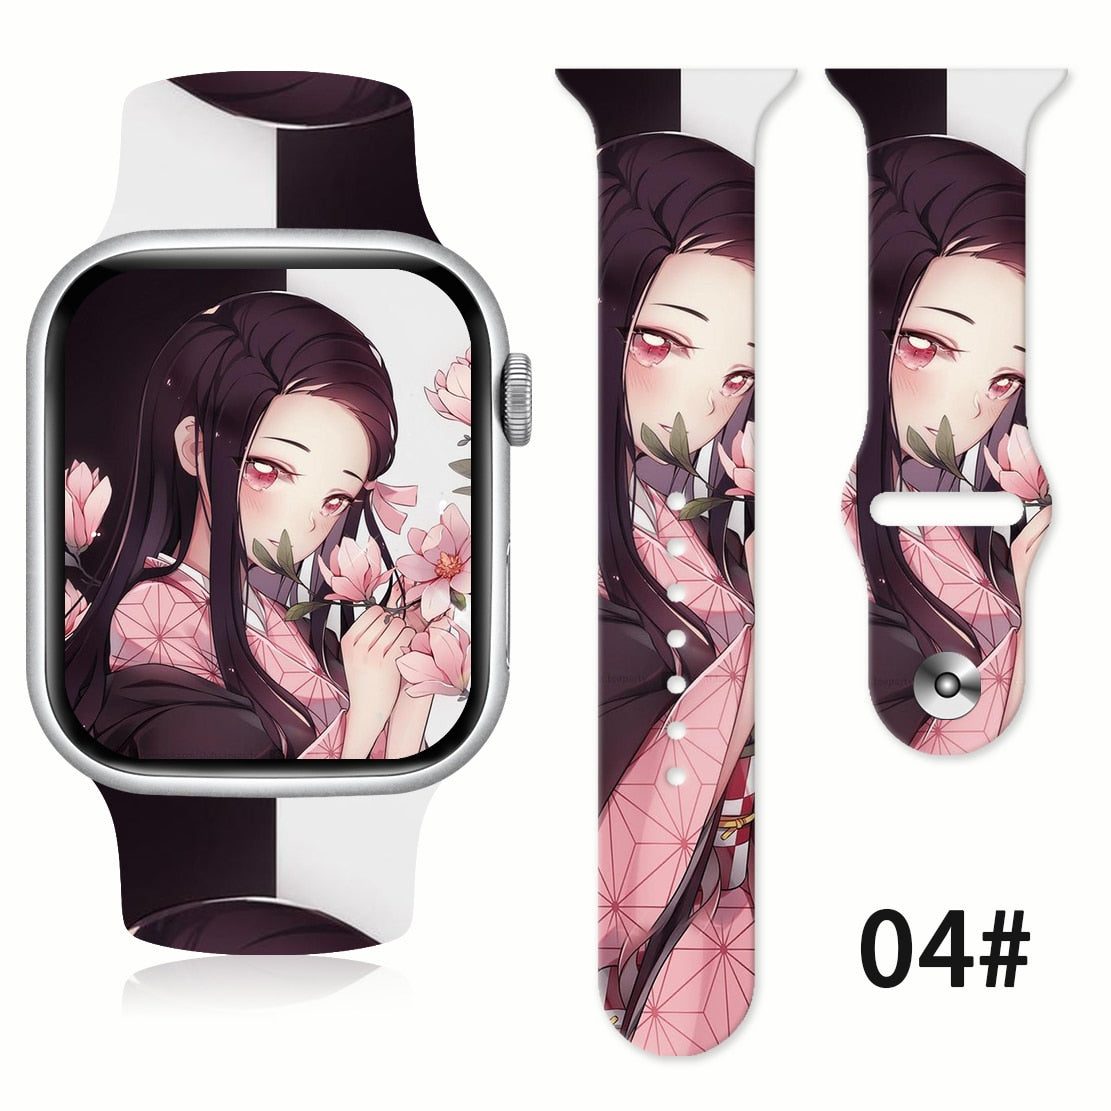 Demon Slayer Strap Band for Apple Watch 04